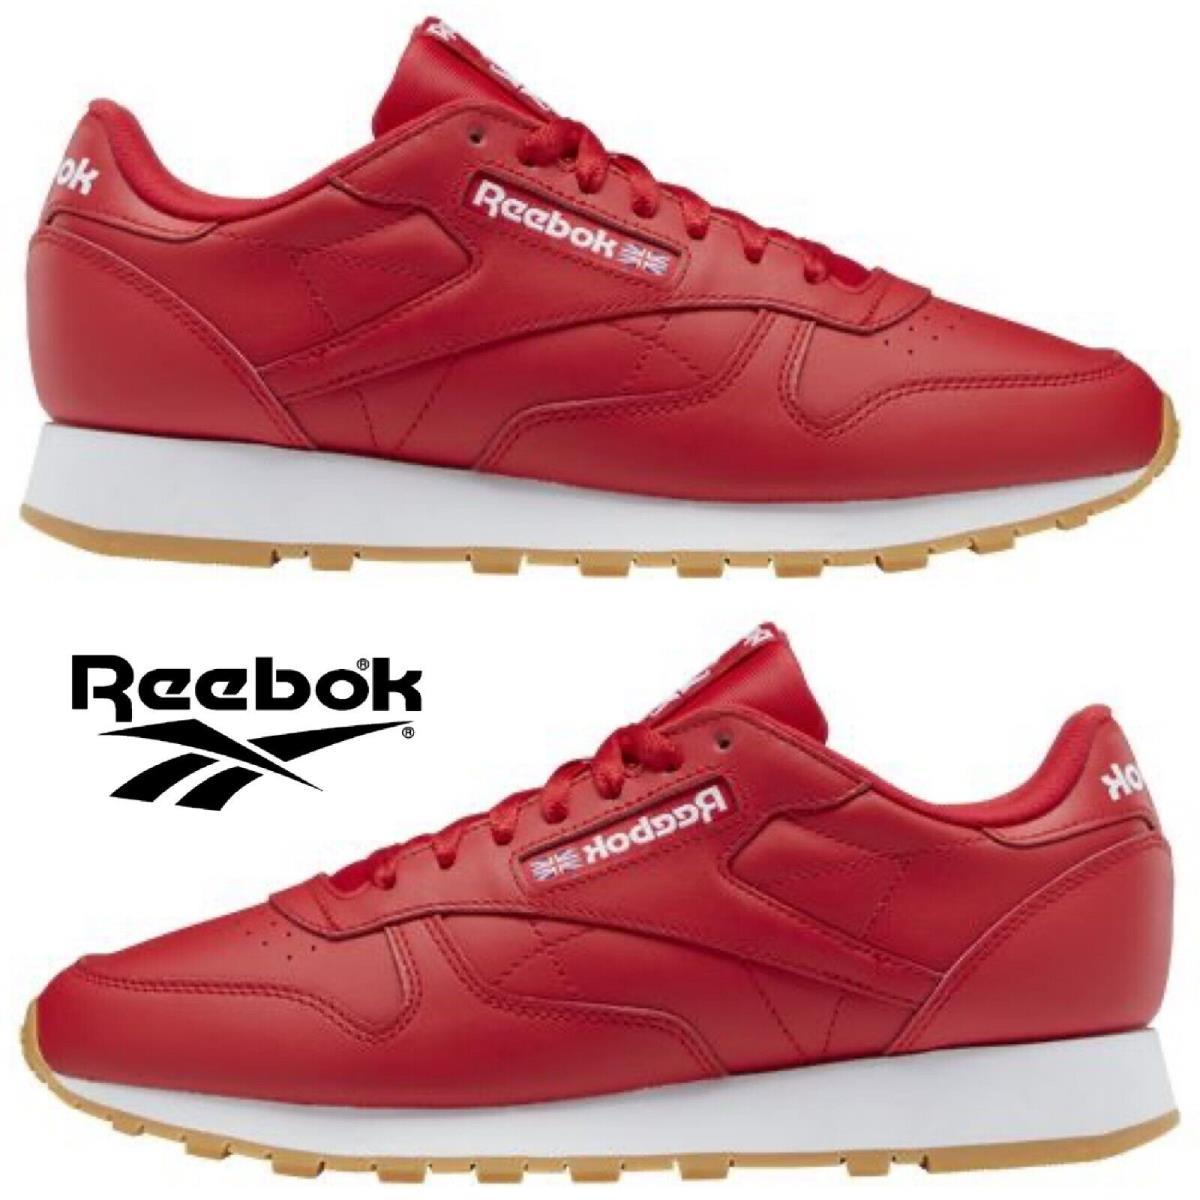 Reebok Classic Leather Running Shoes Men`s Sneakers Running Training Sport Red - Red, Manufacturer: Red/Beige